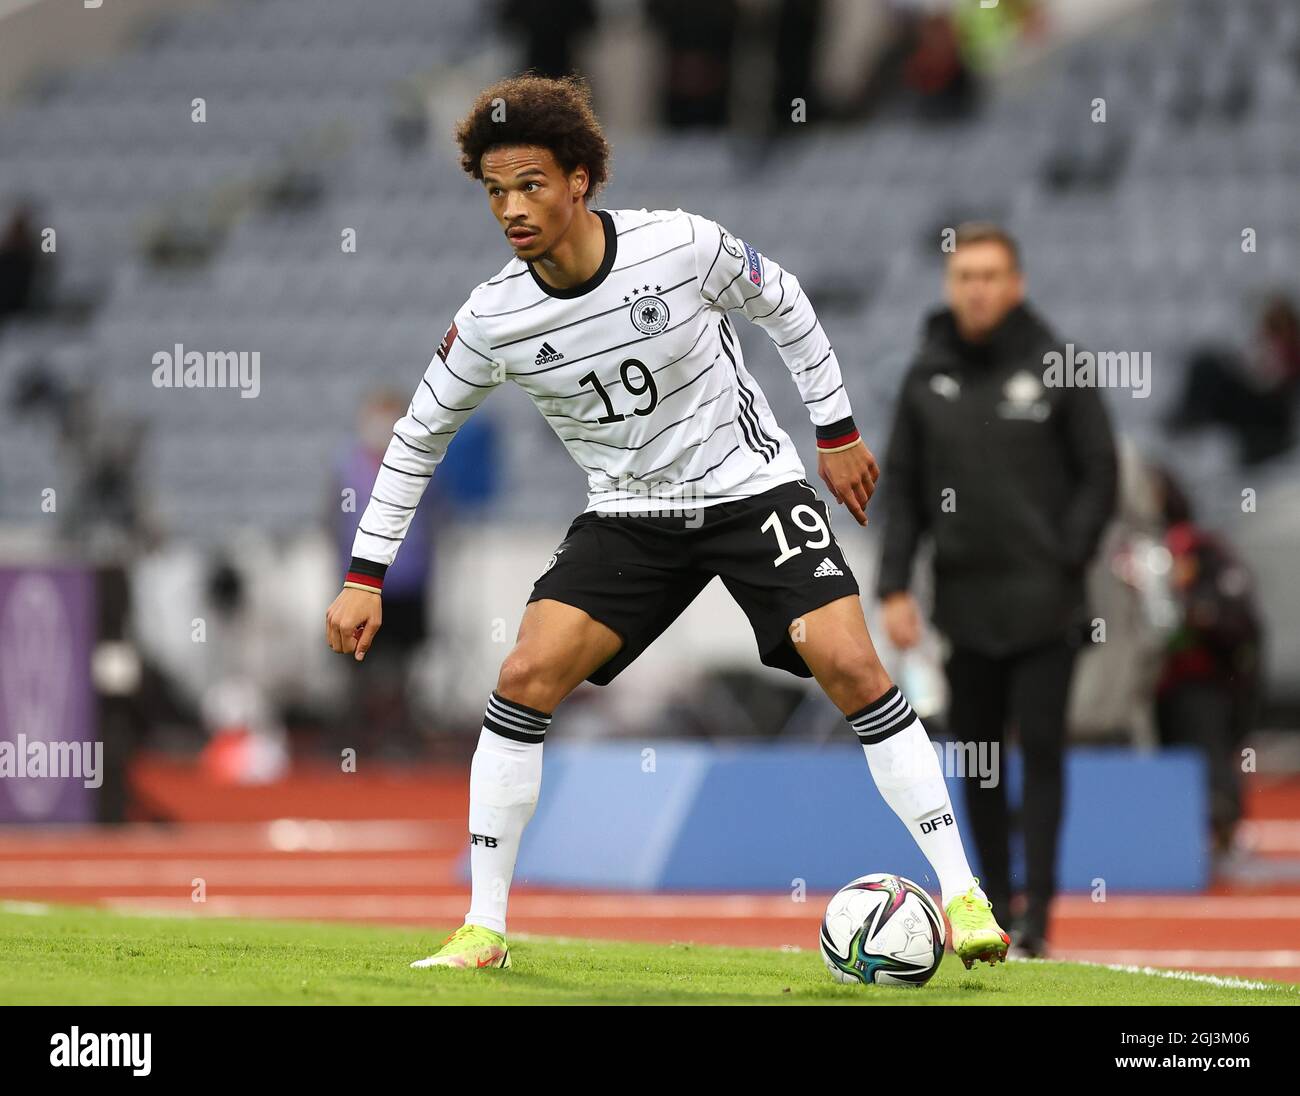 Reykjavik, Iceland. 08th Sep, 2021. Football: World Cup qualifying, Iceland - Germany, Group stage, Group J, Matchday 6 at Laugardalsvöllur stadium. Leroy Sané plays the ball. Credit: Christian Charisius/dpa/Alamy Live News Stock Photo